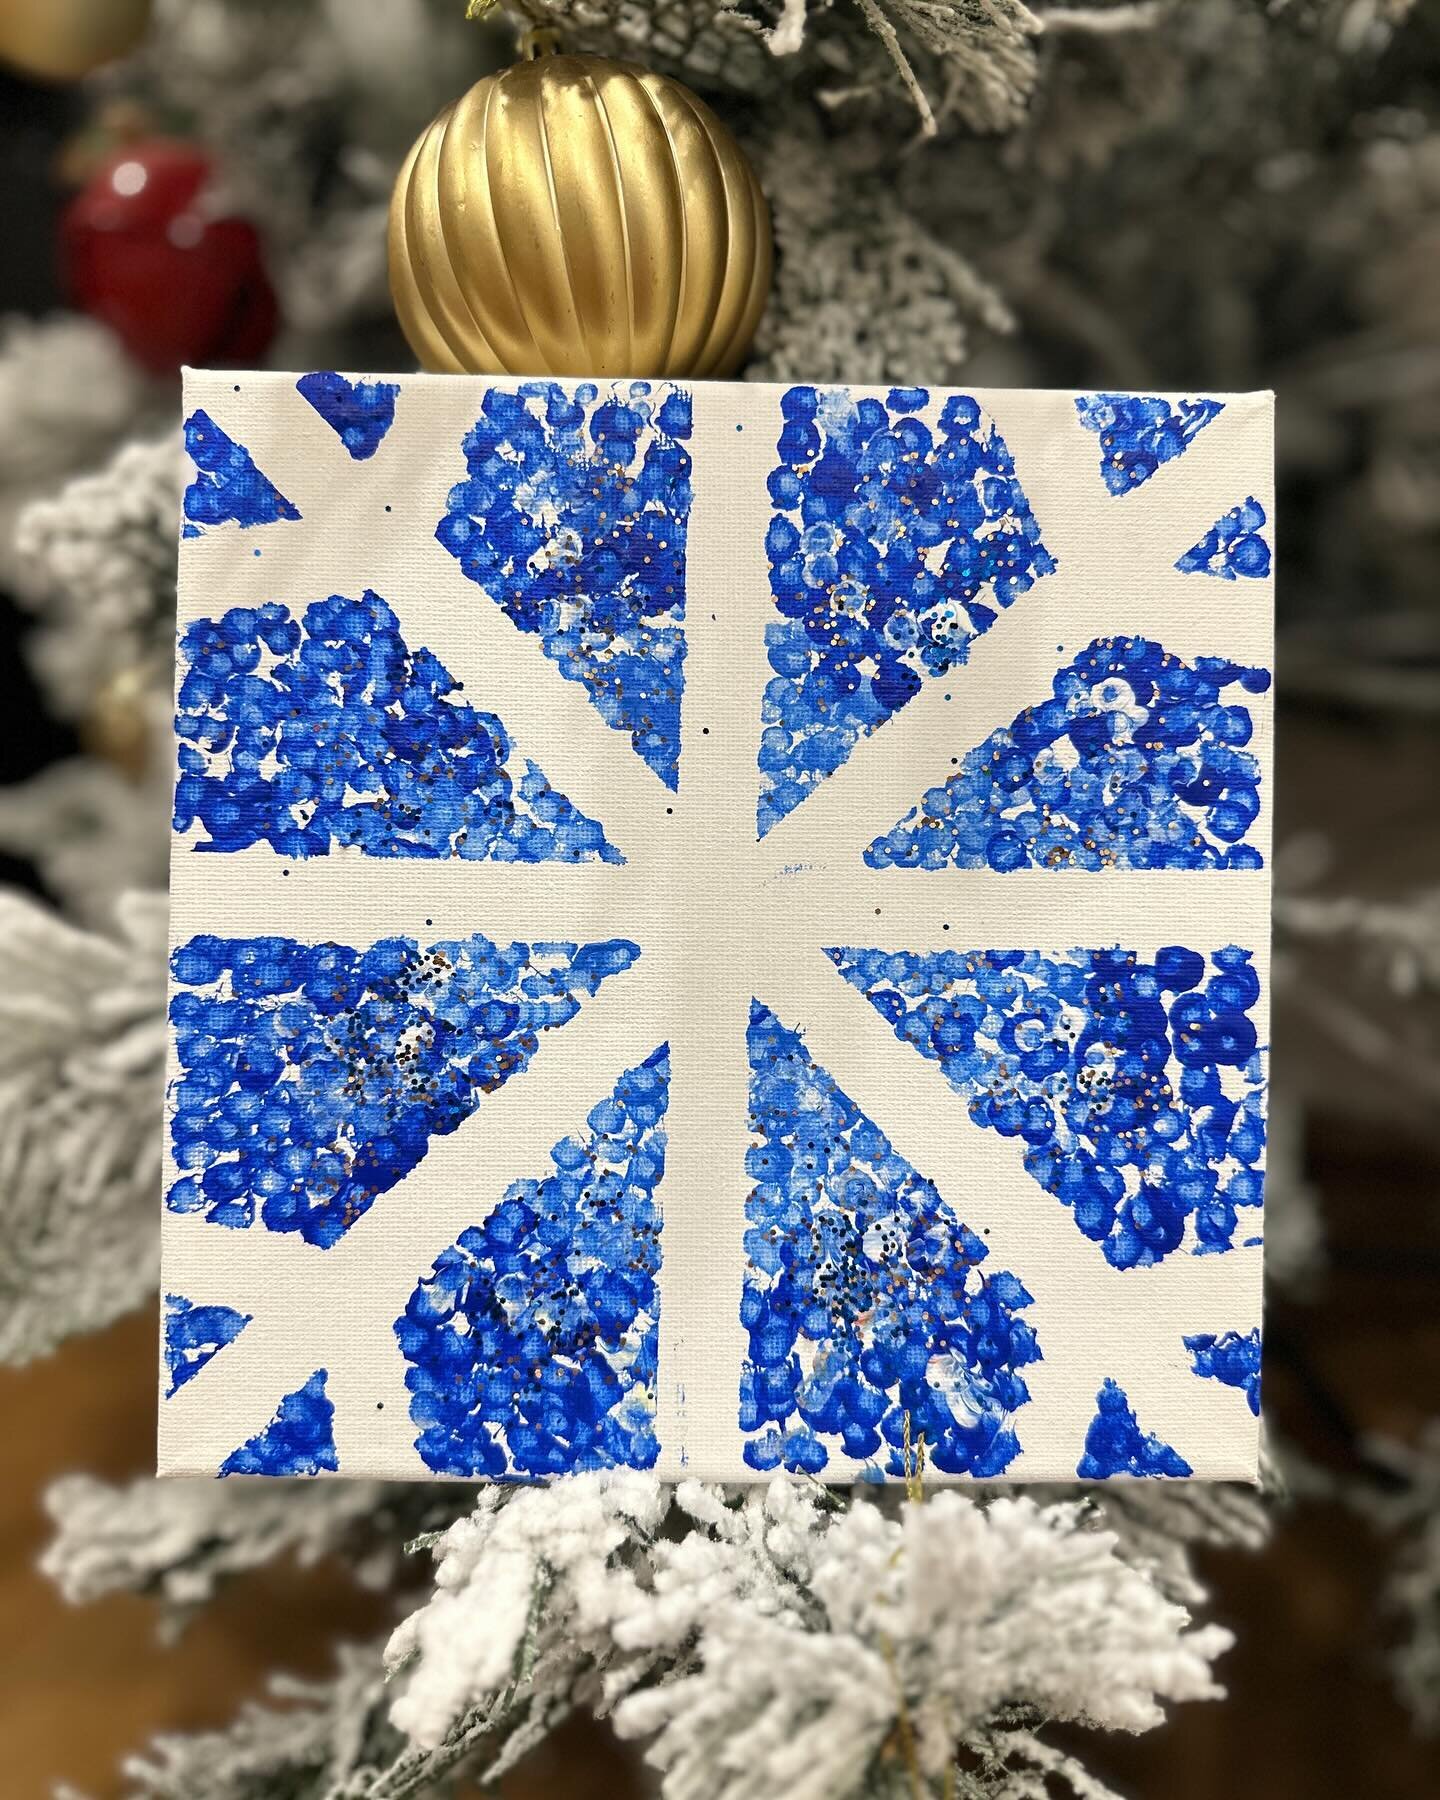 Join us for a creative adventure as we craft captivating snowflakes on canvas using a tape and dots technique.